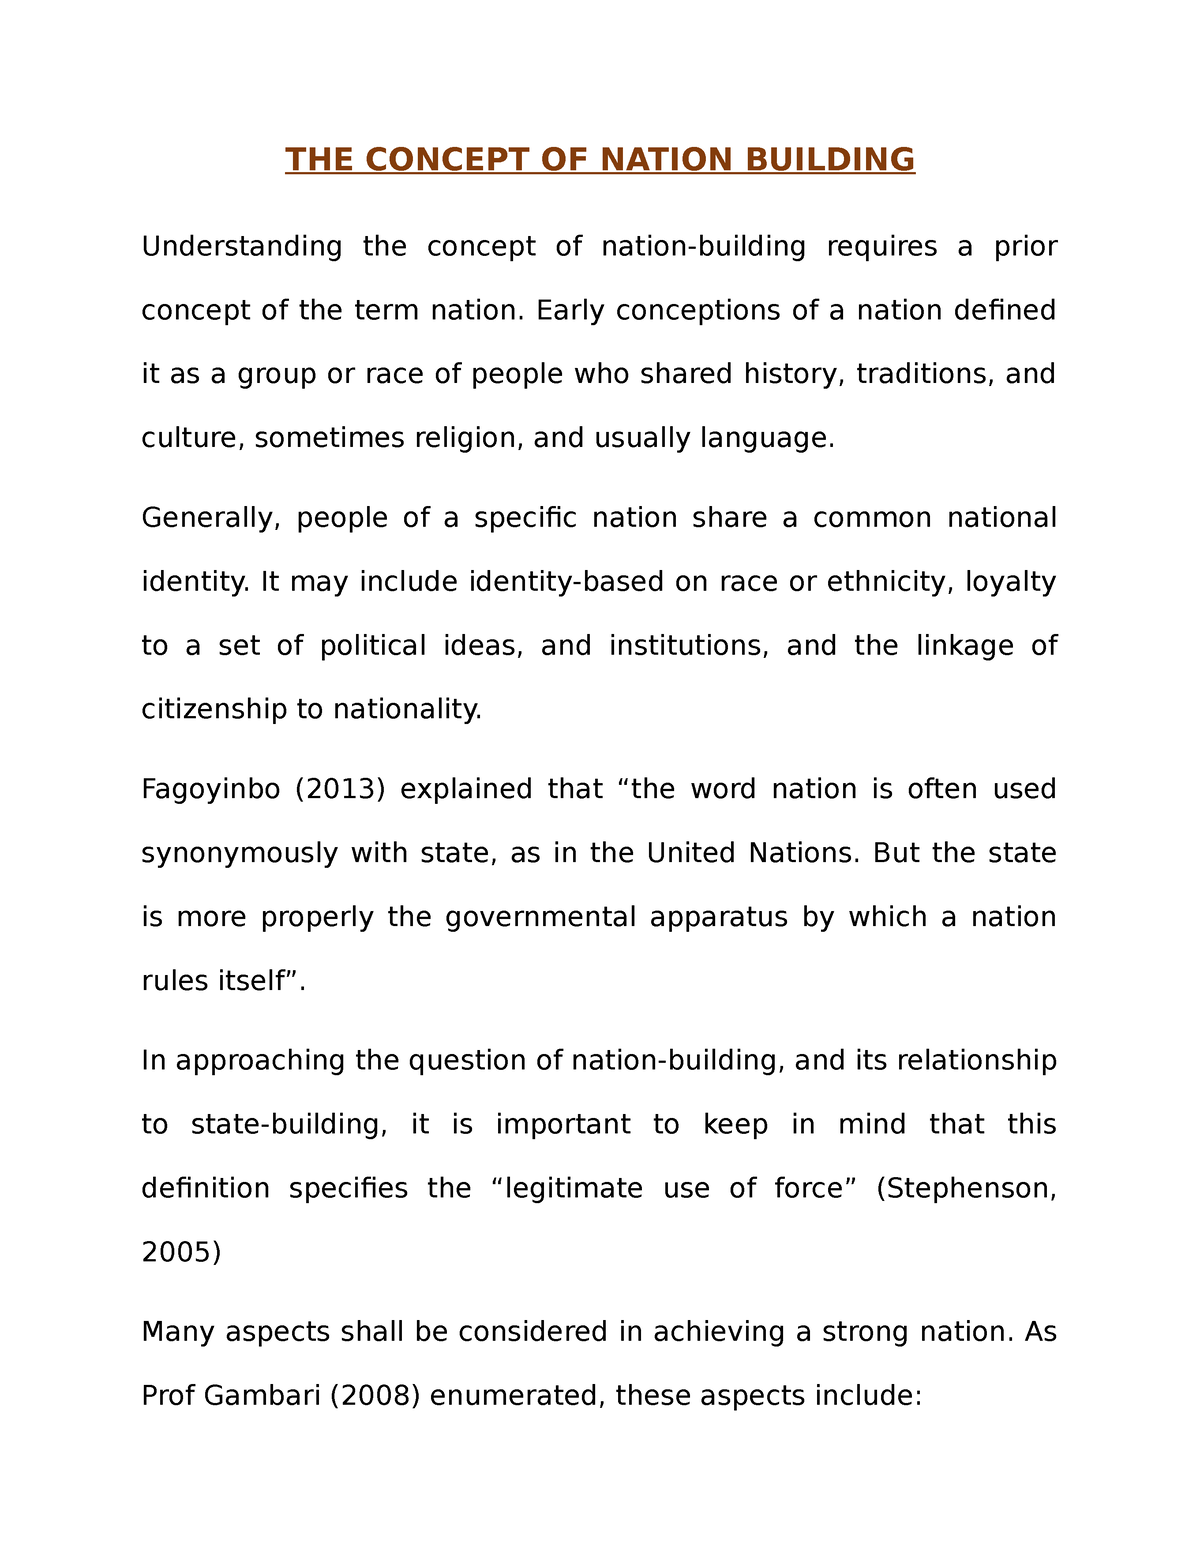 research paper about nation building